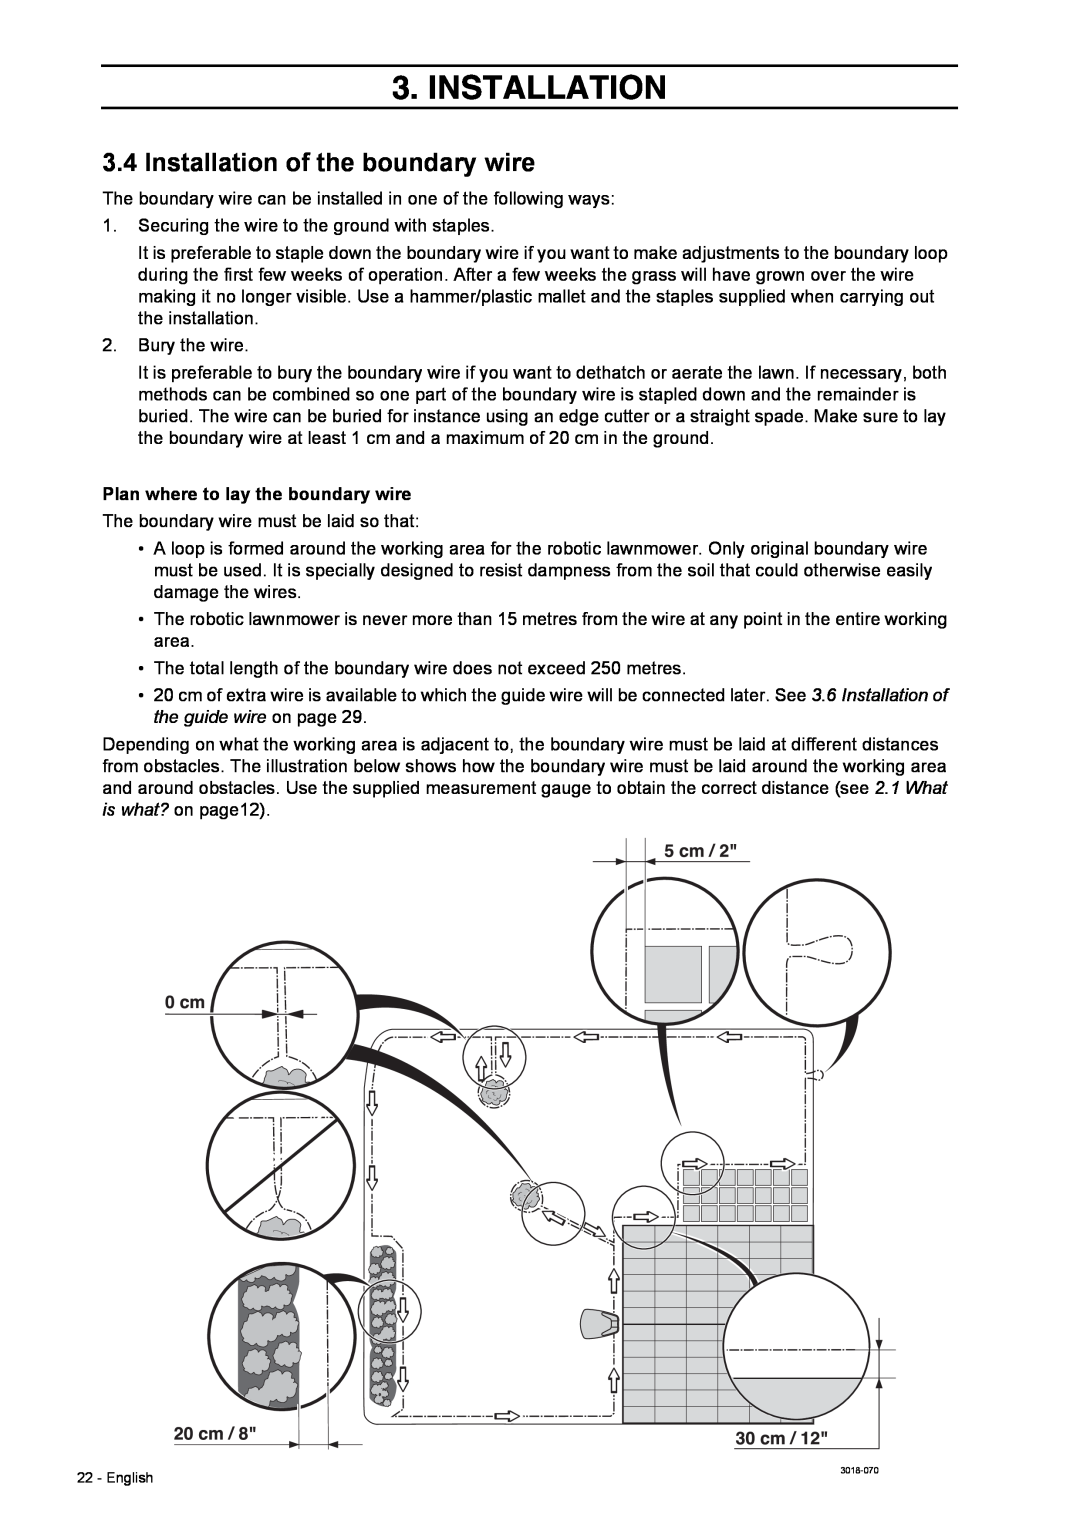 Husqvarna 308 manual Installation of the boundary wire, Plan where to lay the boundary wire 